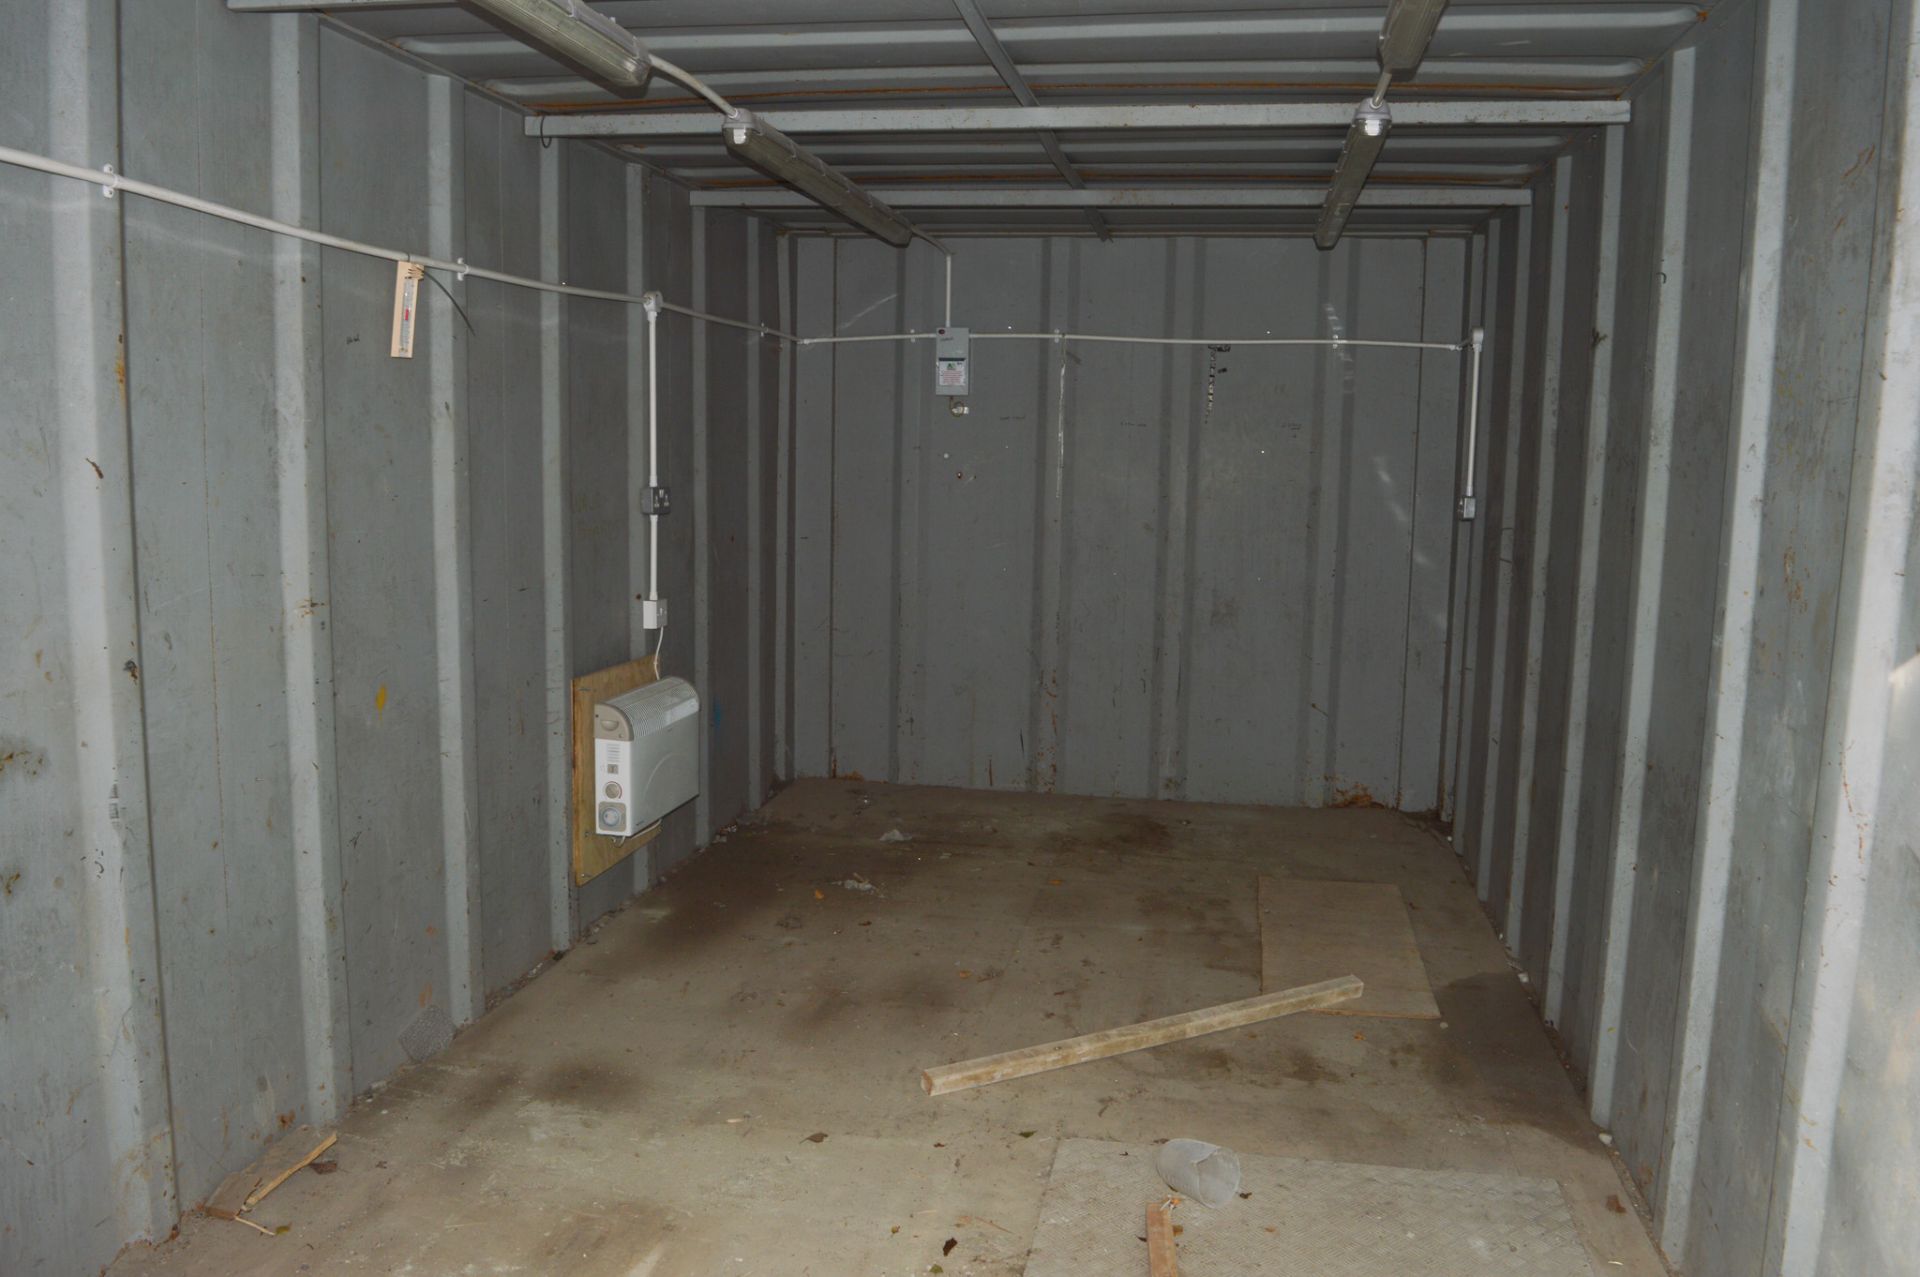 21 ft x 9 ft steel anti vandal shipping container  c/w keys in office  A508242 - Image 5 of 6